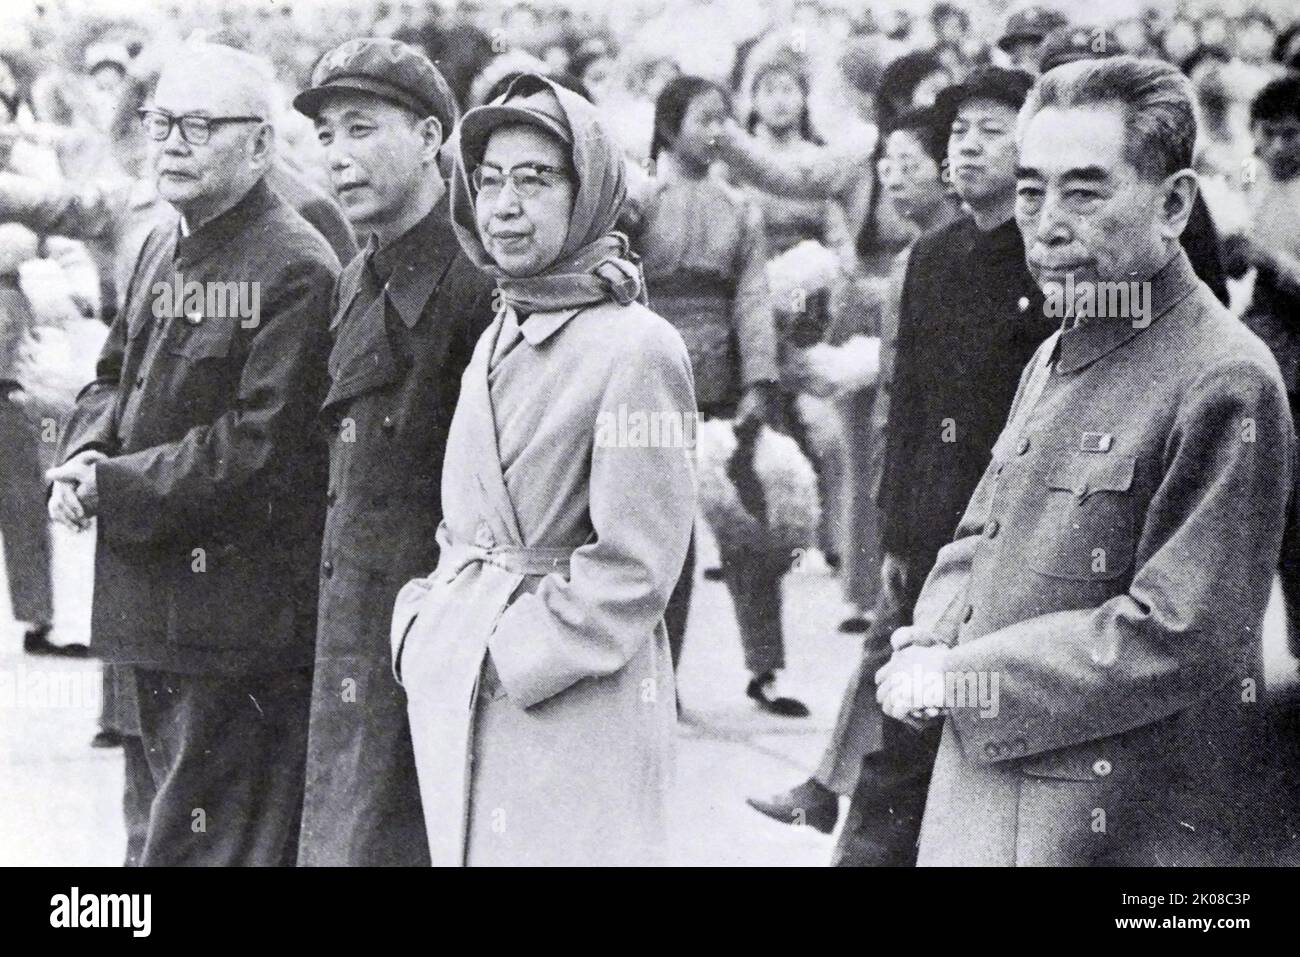 Chiang Ch'ing overseeing a reception for Chinese diplomats in 1974. Left to right: Yeh Chien-ying (Deputy chairman of the Military Affairs Commission), Wang Hung-wen, Yao Wen-yuan and Chou En-lai. Jiang Qing (19 March 1914 - 14 May 1991), also known as Madame Mao, was a Chinese communist revolutionary, actress, and major political figure during the Cultural Revolution (1966-1976). She was the fourth wife of Mao Zedong, the Chairman of the Communist Party and Paramount leader of China Stock Photo